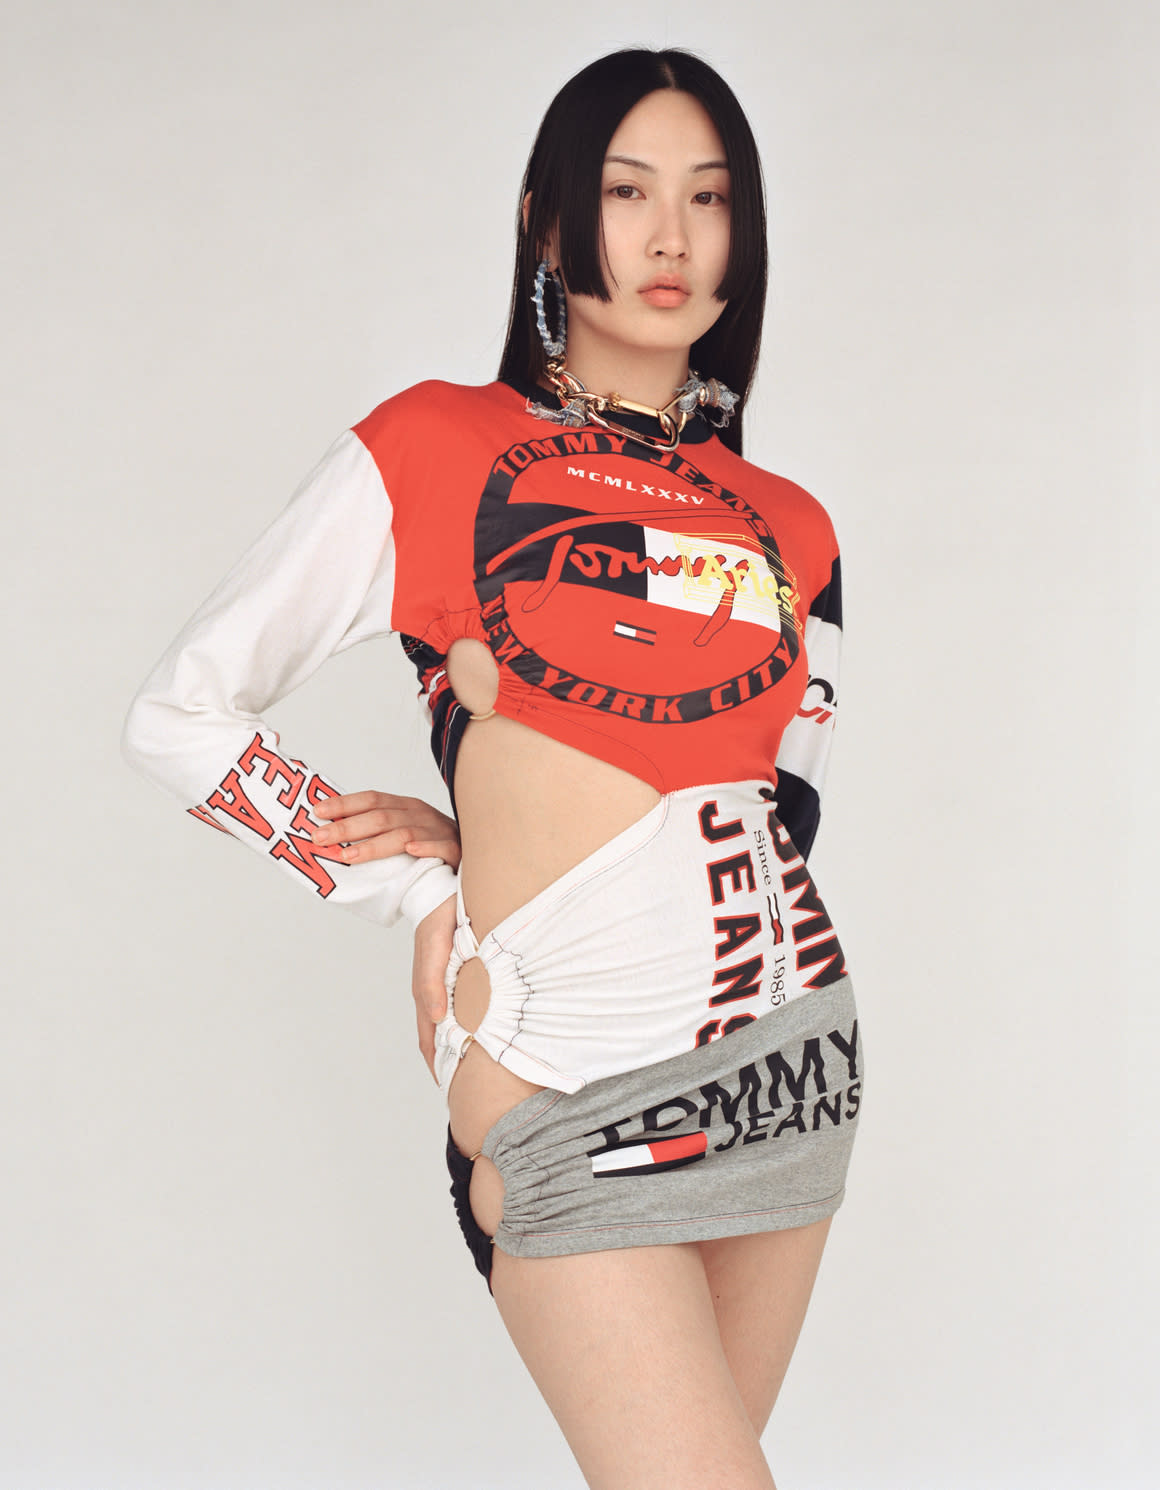 Tommy Jeans model image is shown